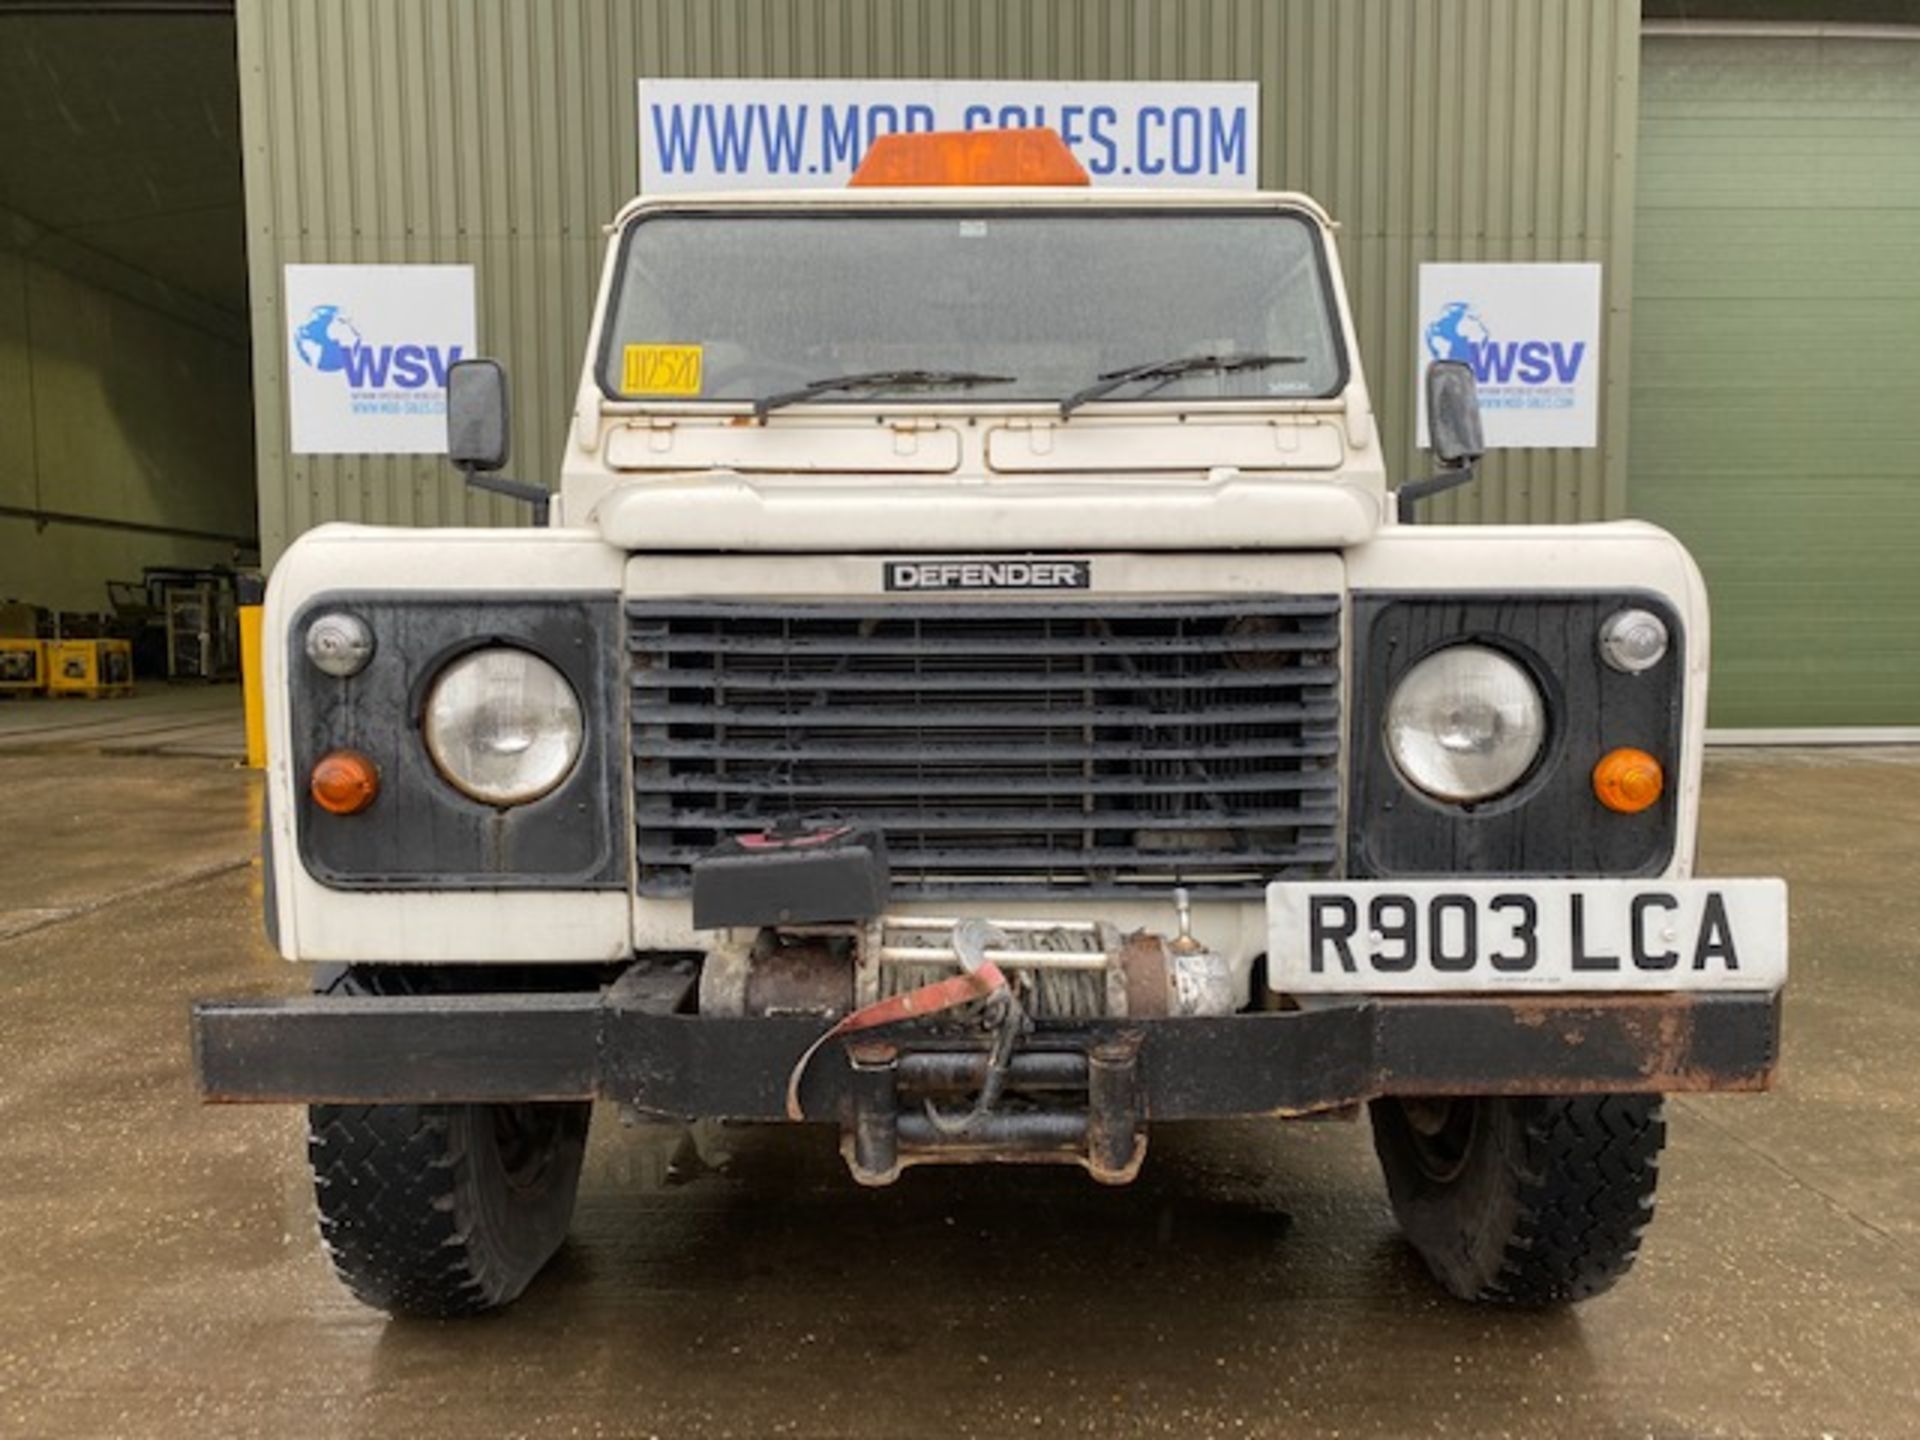 1 Owner Recent Release from UK Council 1998 Land Rover Defender 110 Hi-Capacity Pick Up - Image 3 of 41